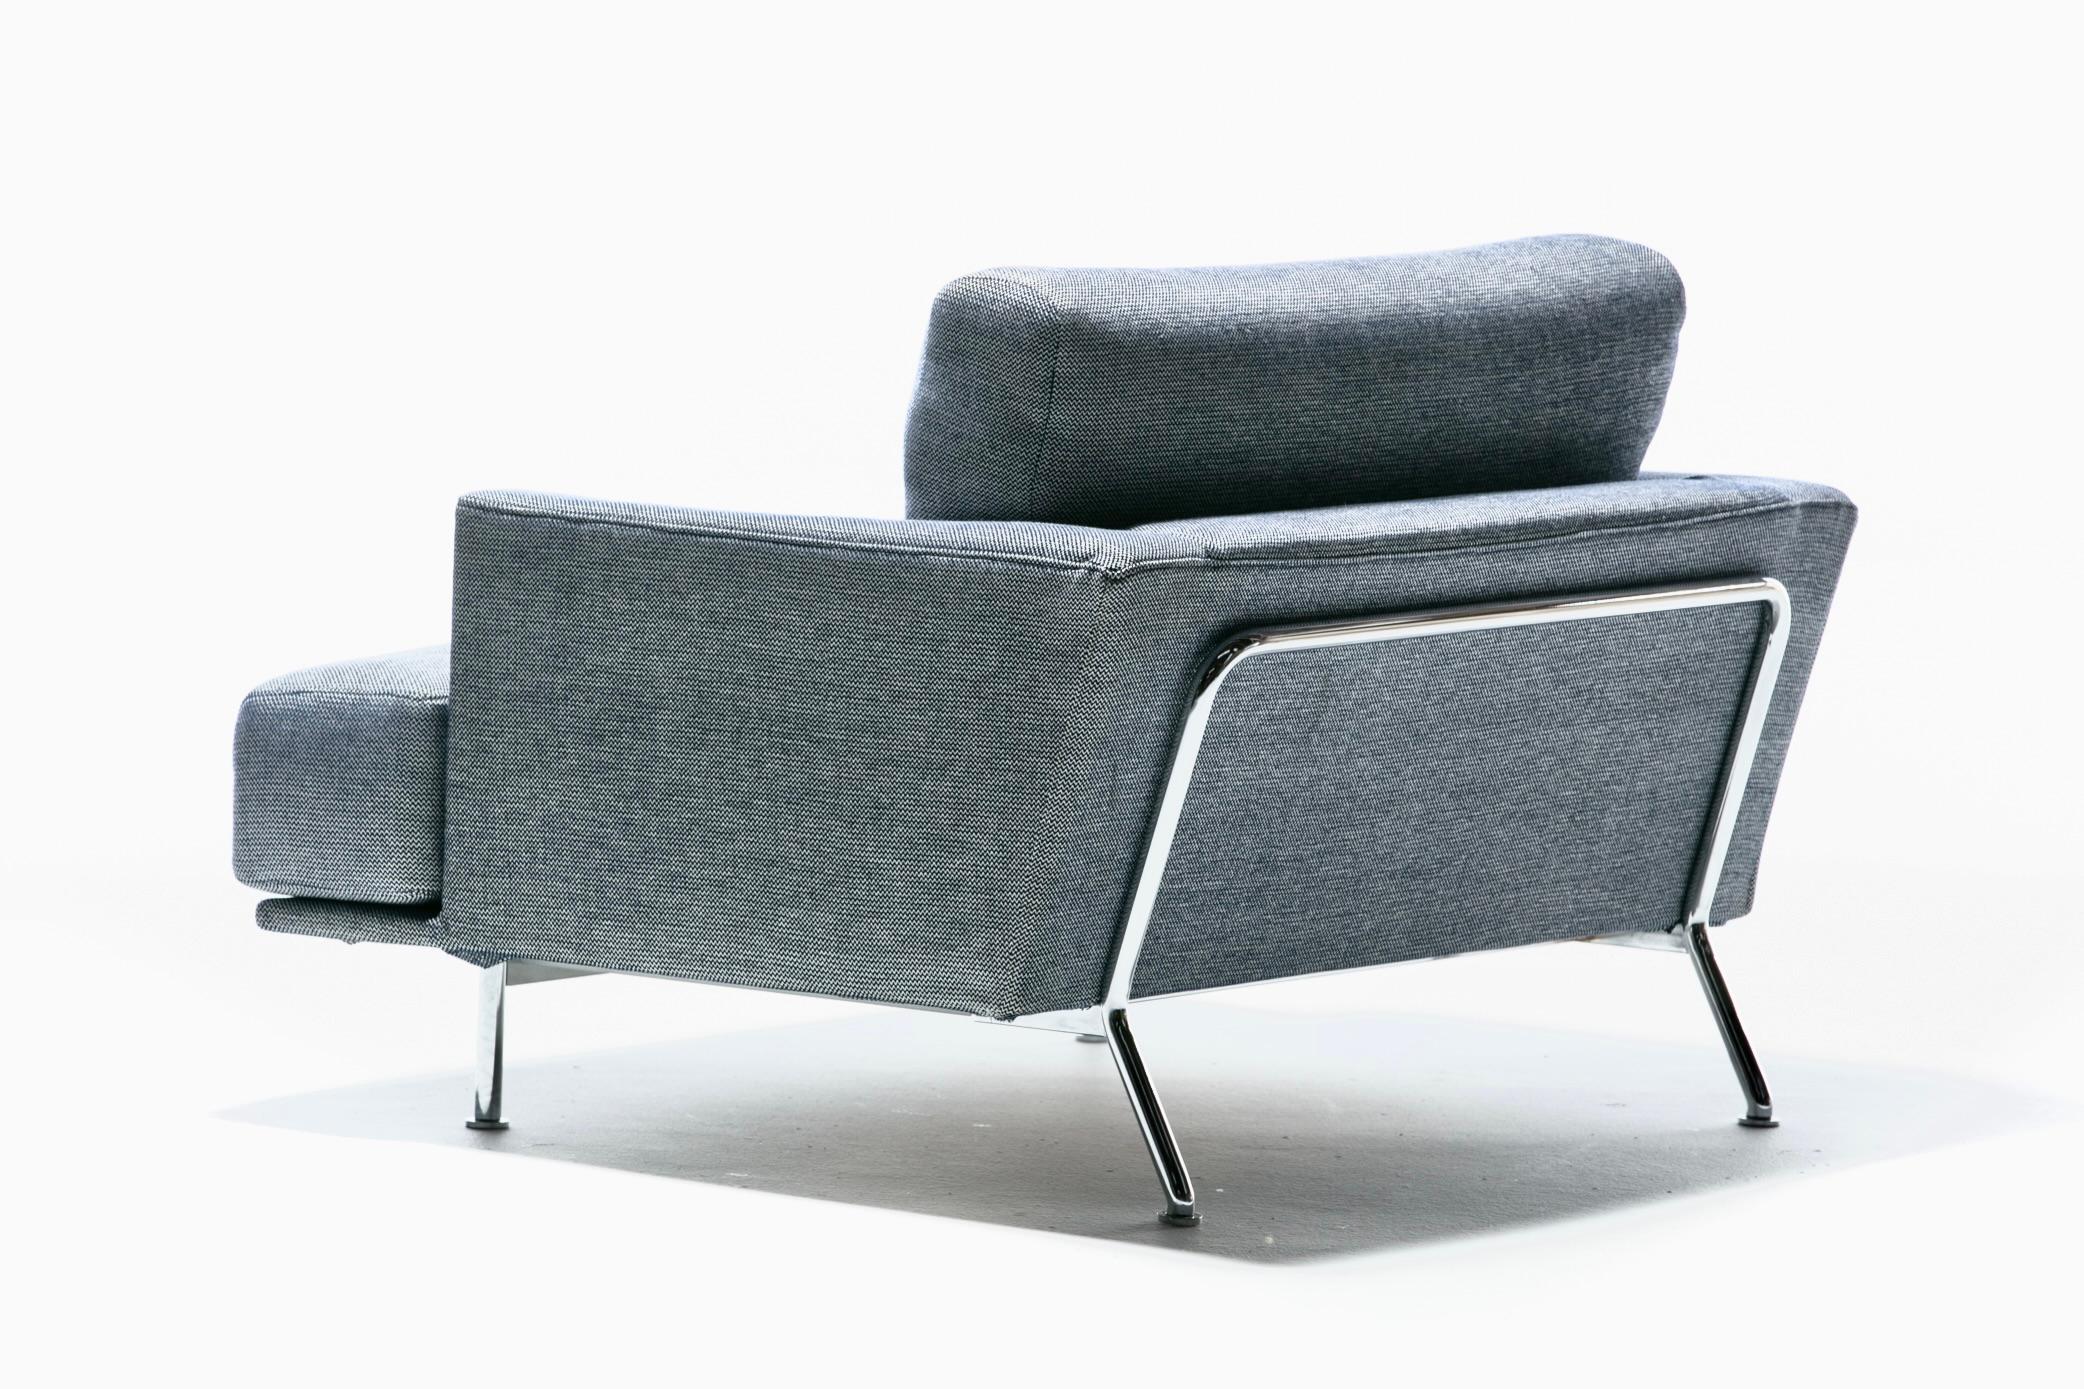 Upholstery Pair of Imported Italian Modern Cassina 253 Nest Lounge Chairs by Piero Lissoni 